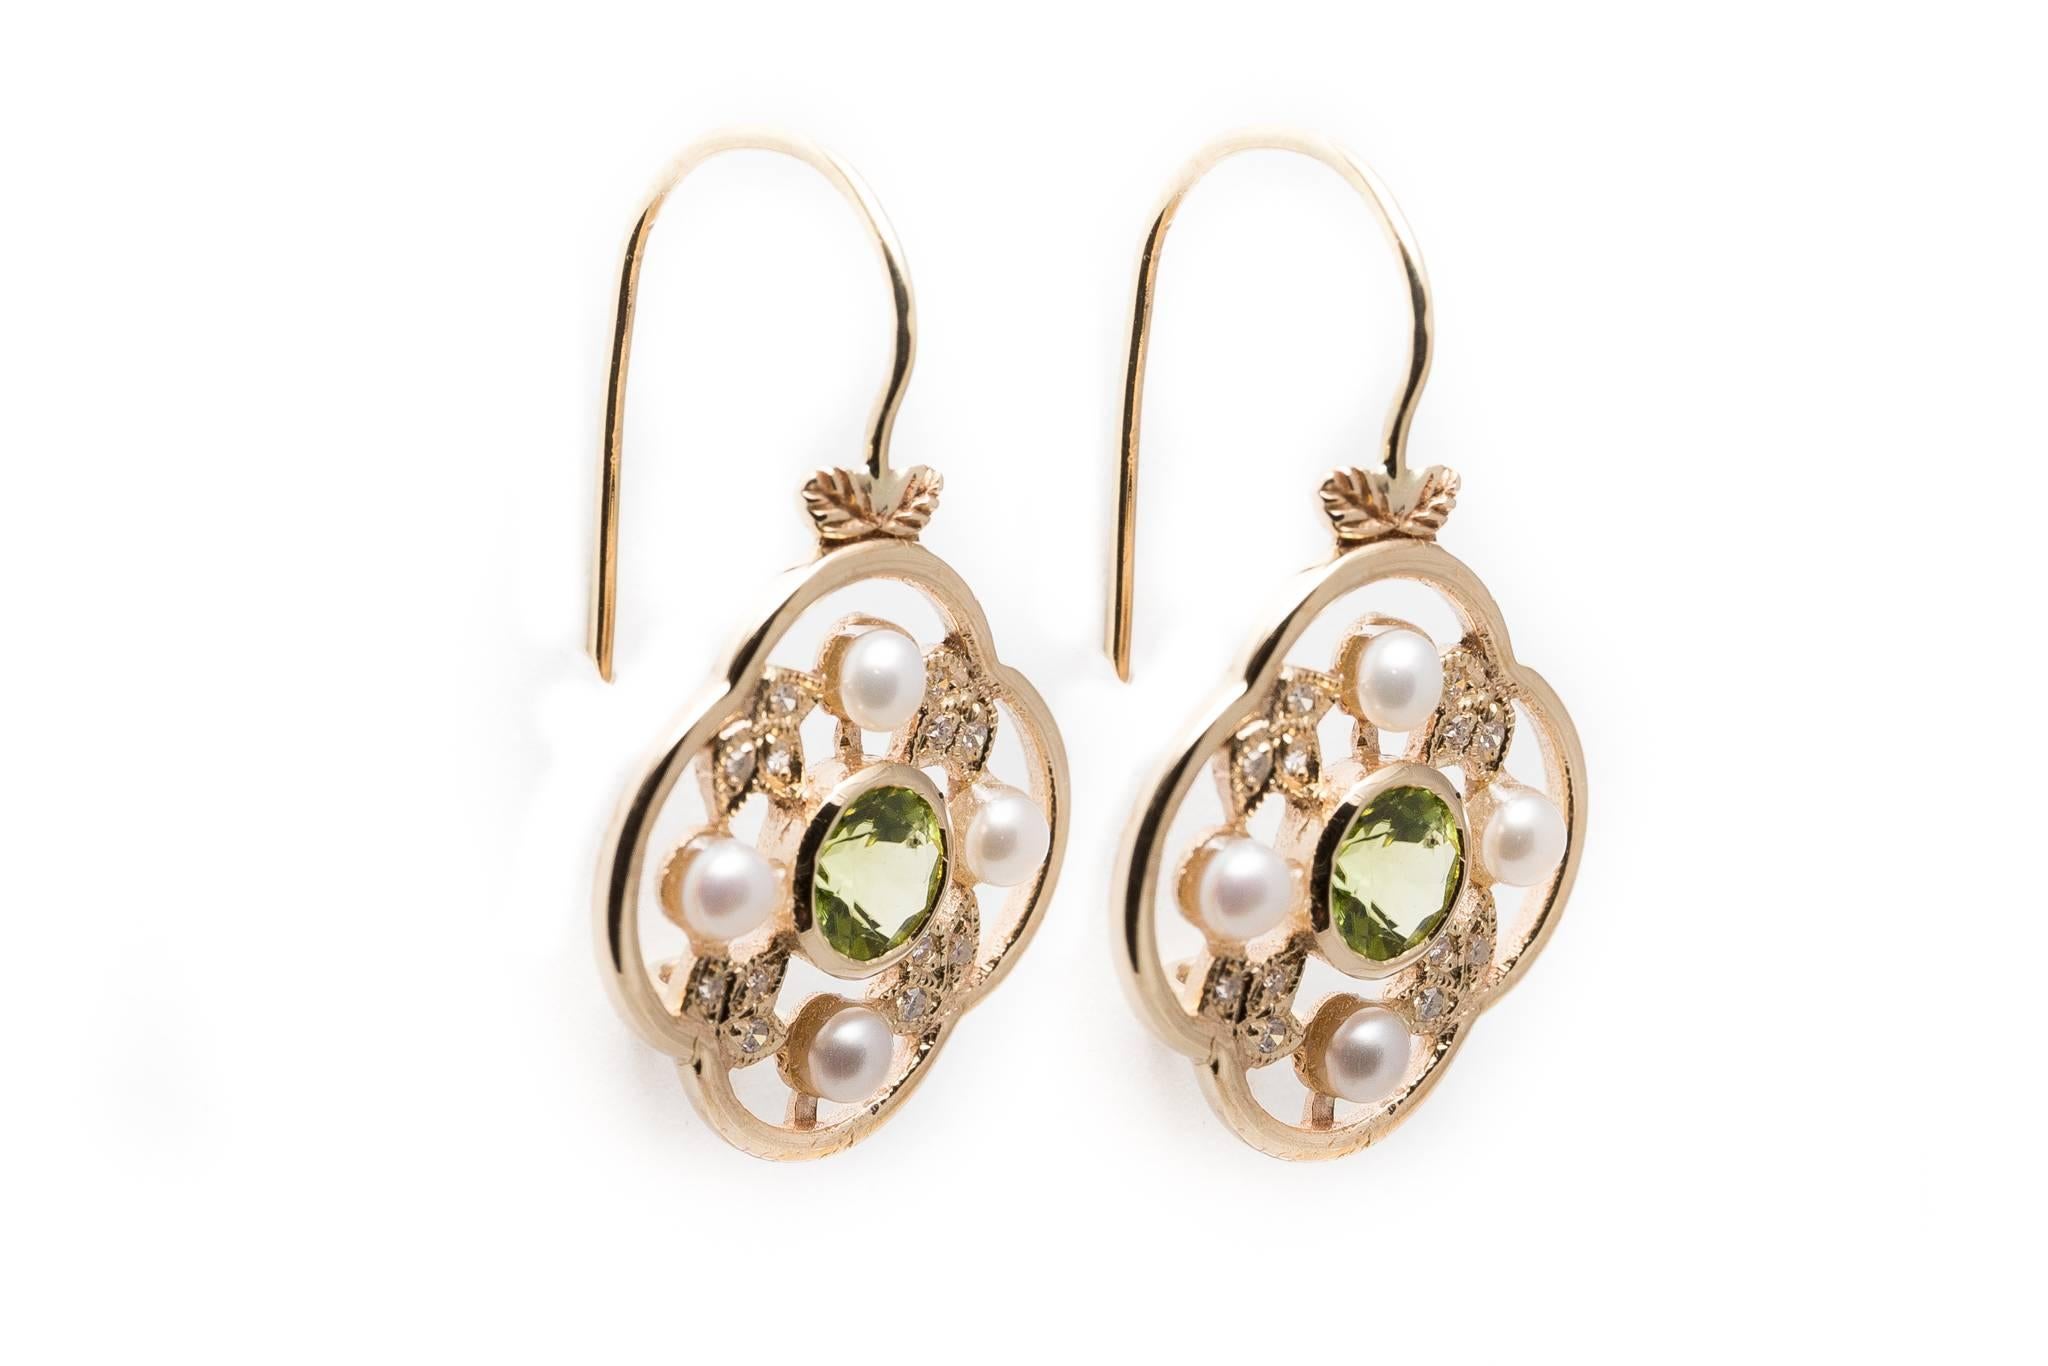 A pair of beautiful handmade floral inspired peridot, diamond, and pearl earrings in 9 carat yellow gold.  Centered by beautiful European cut peridots framed by diamond set leaves, these classic wire dangle earrings remind us of beautiful